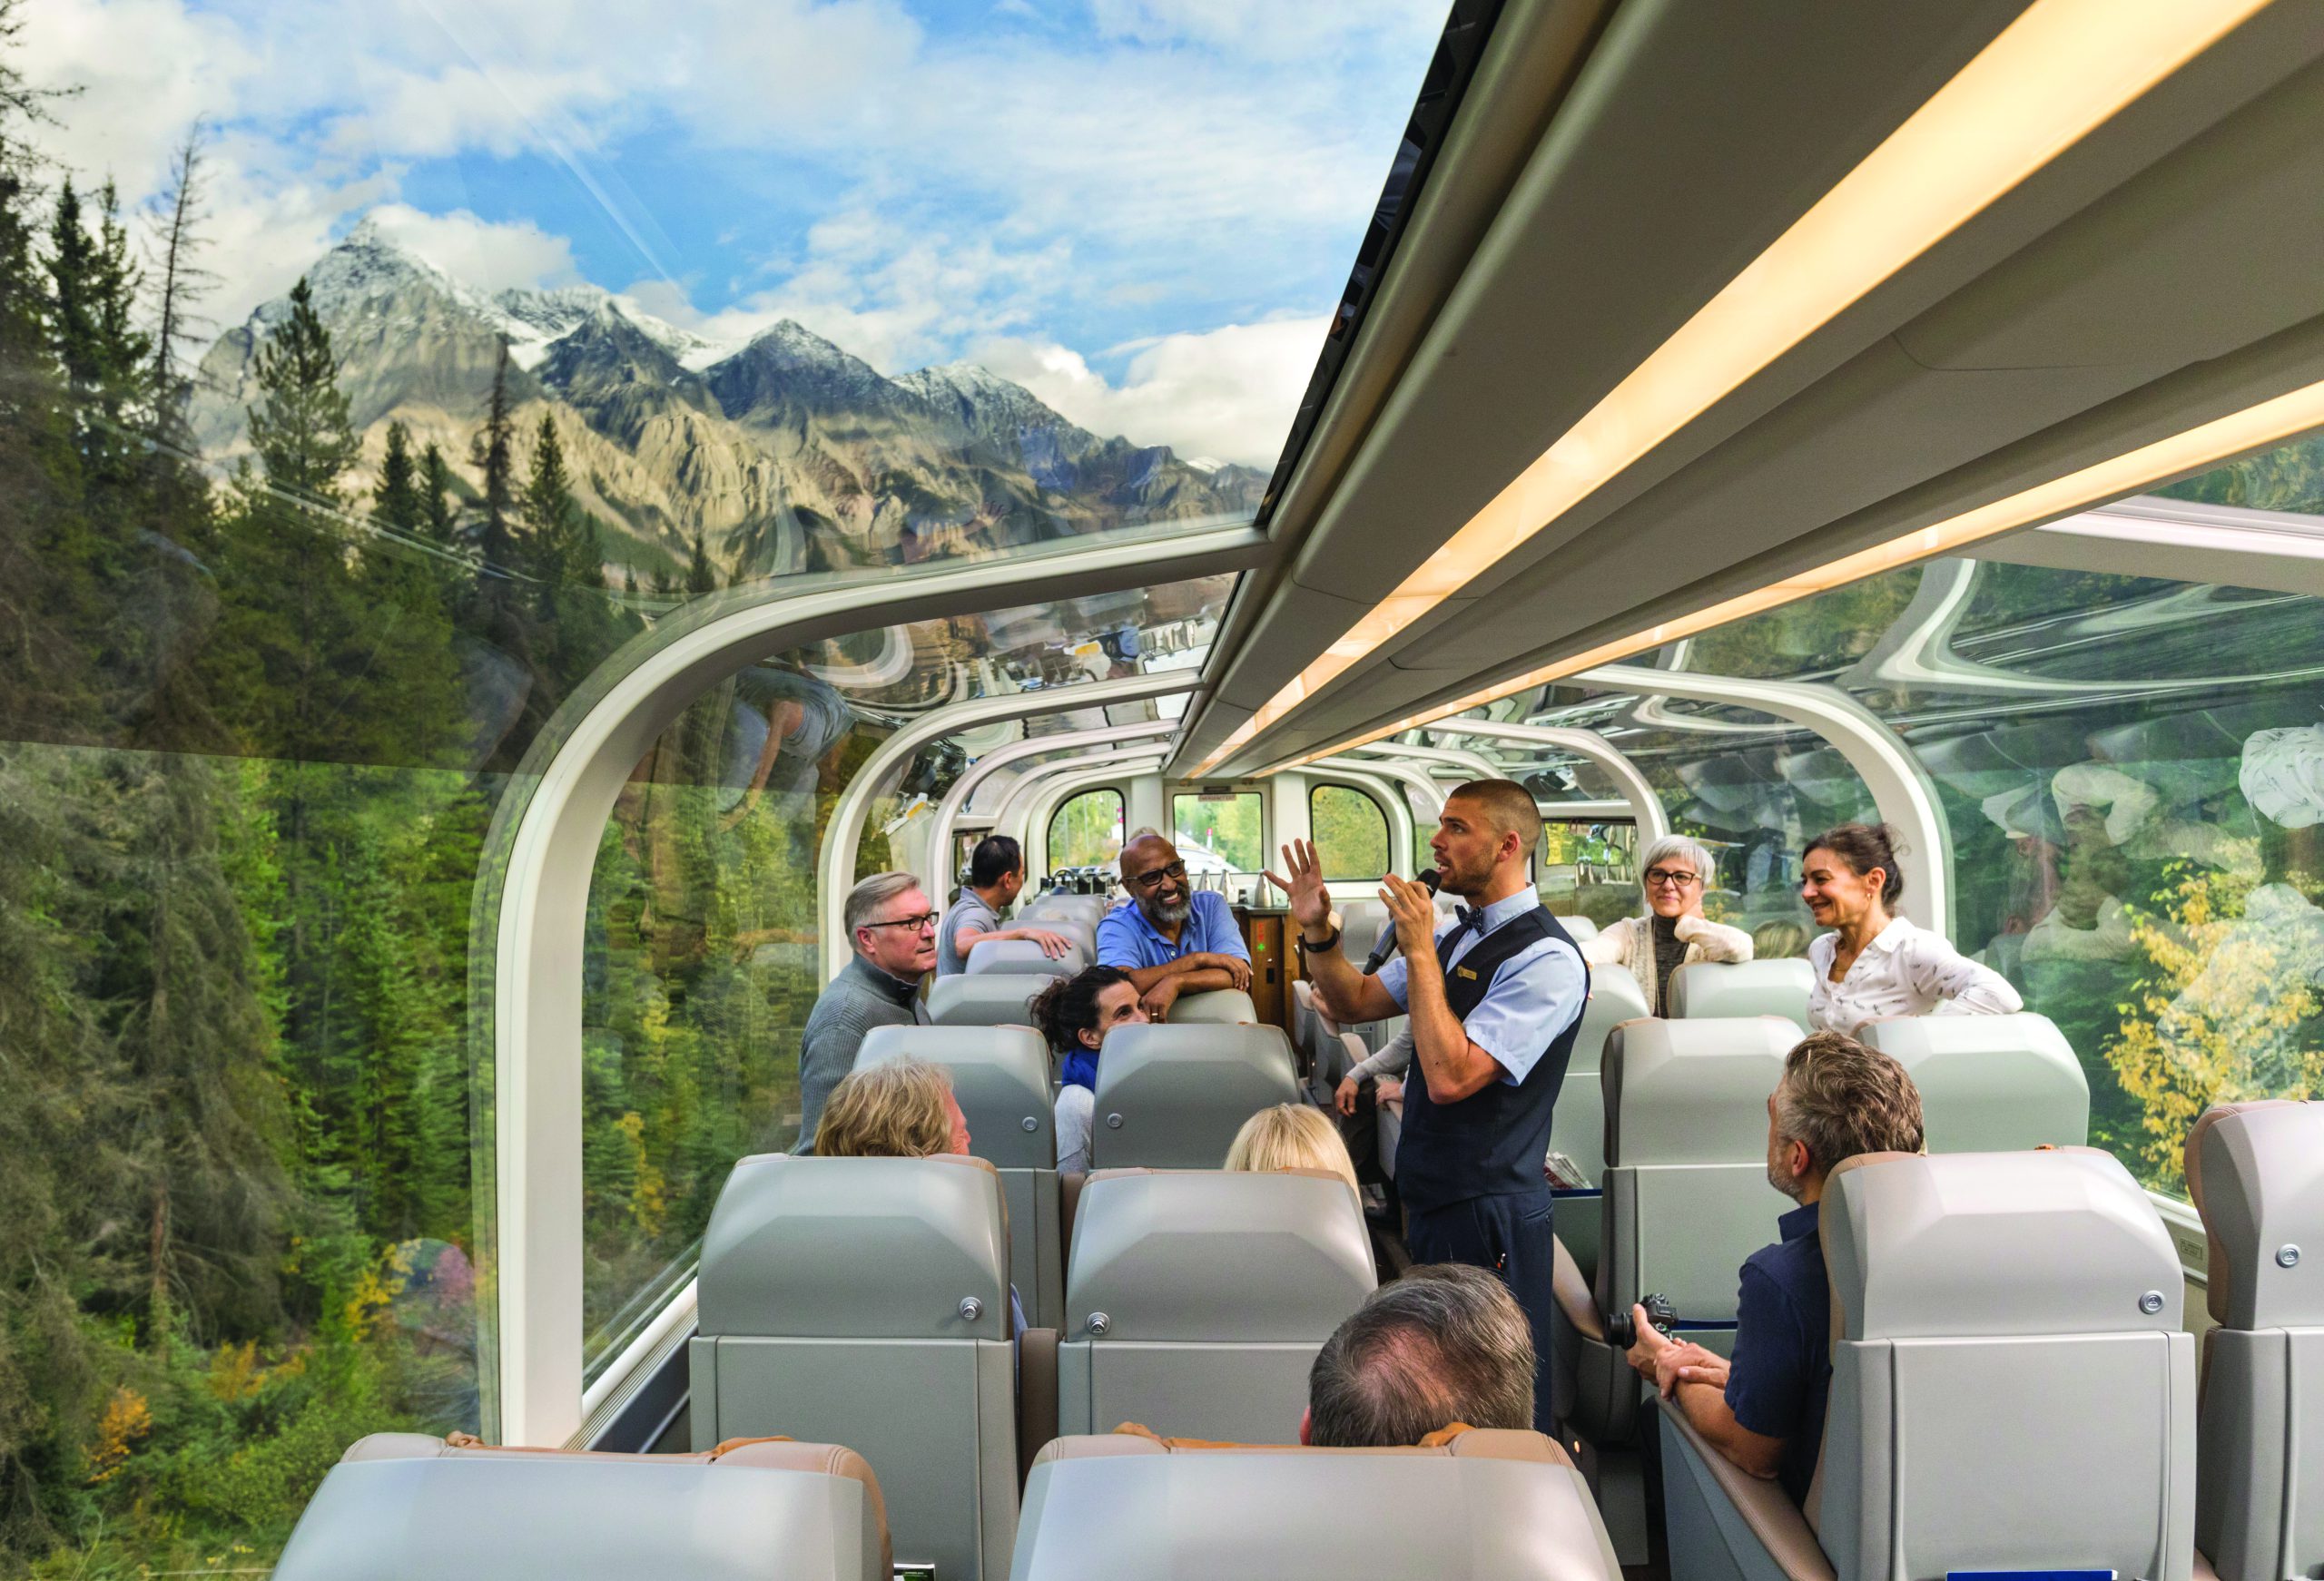 The most spectacular train journey - a trip through the Rocky Mountains